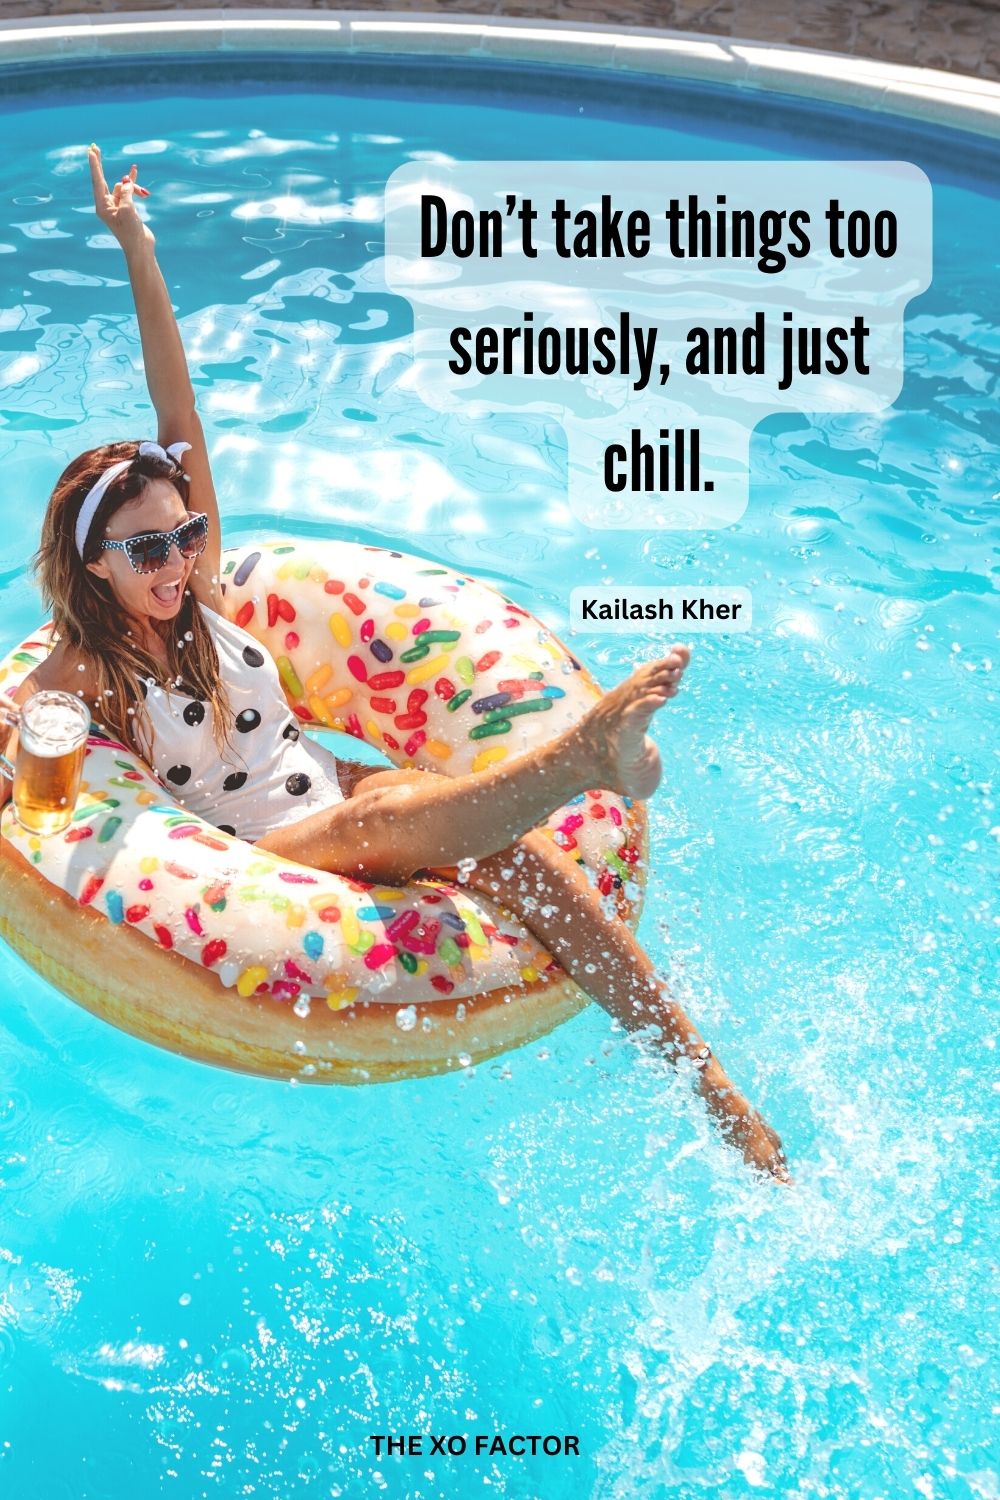 Don’t take things too seriously, and just chill.
Kailash Kher